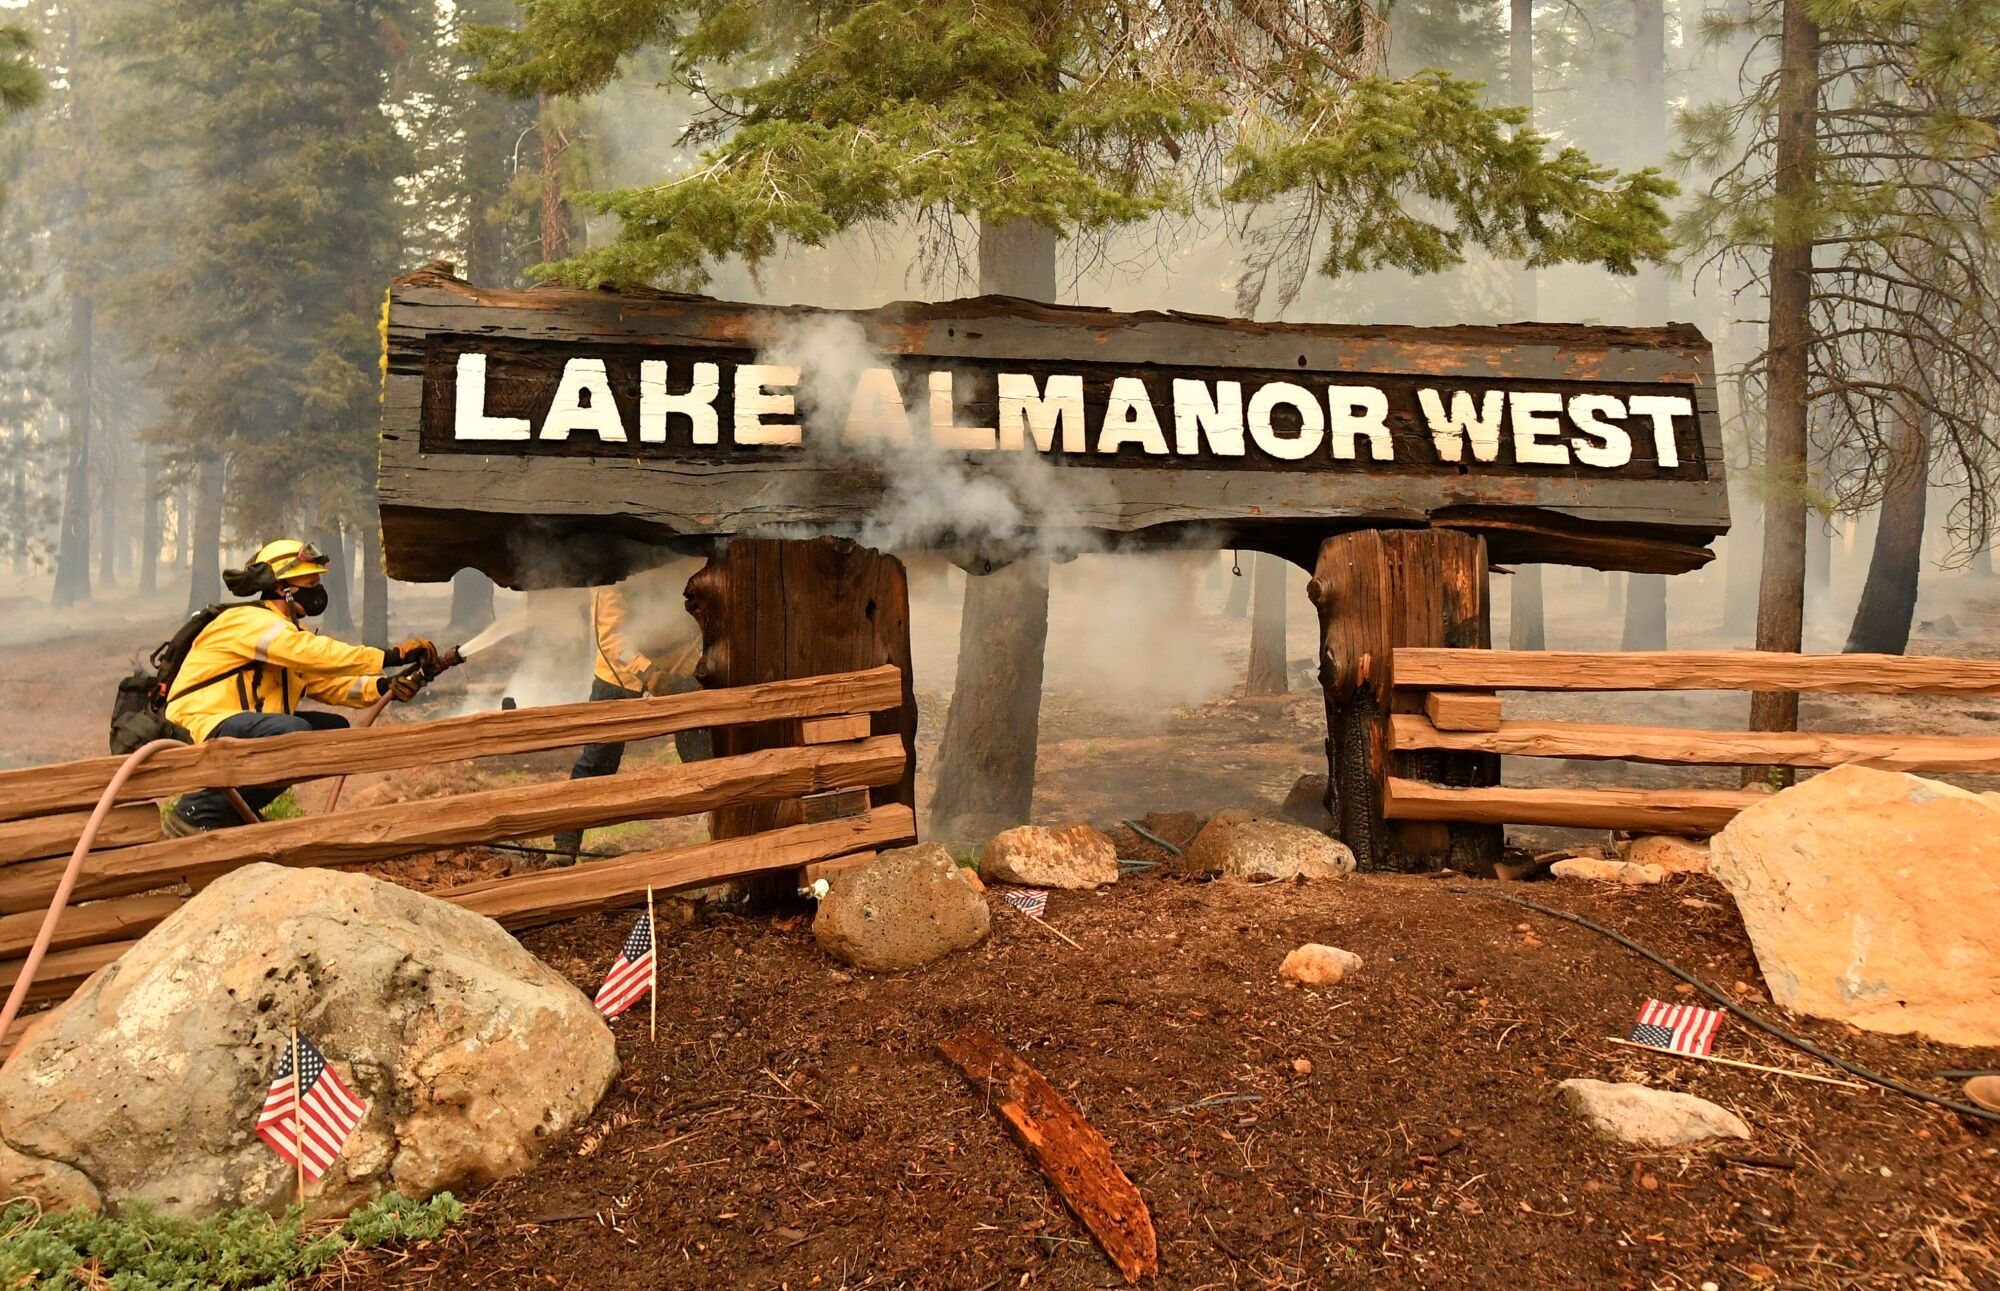 Two firefighters aim their hoses at a smoking wooden sign that says "Lake Almanor West."